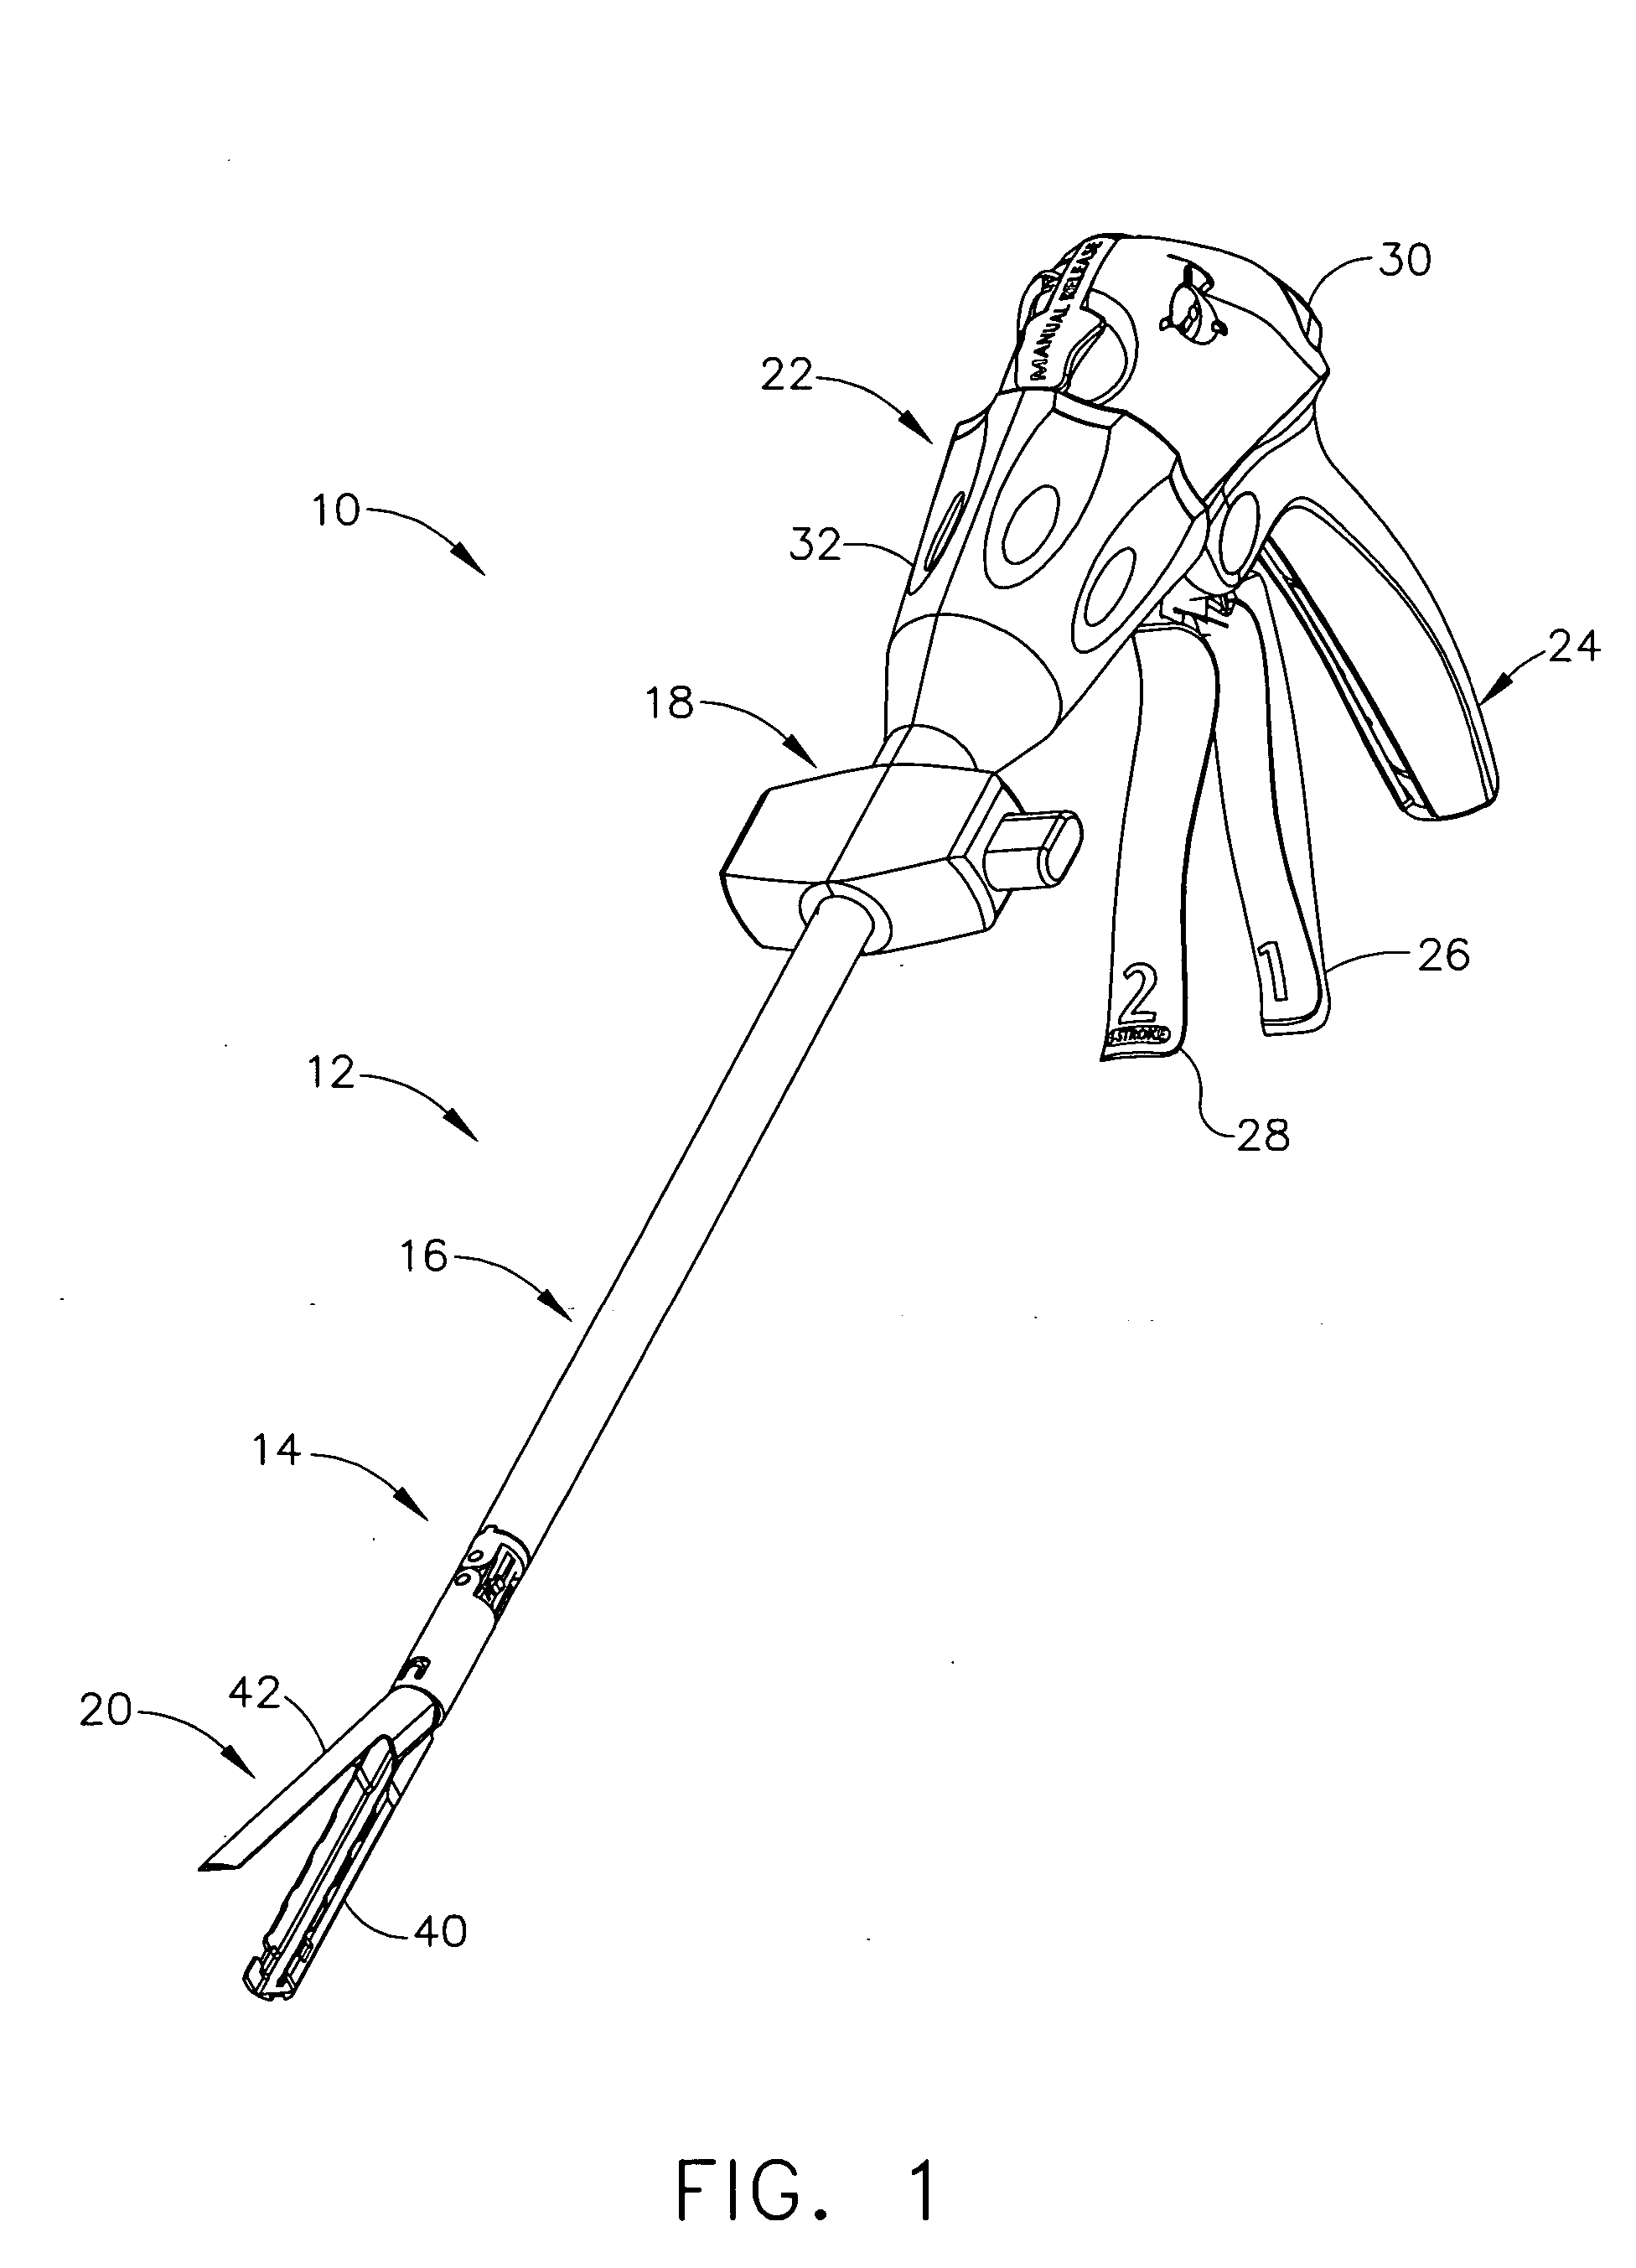 Surgical instrument with articulating shaft with rigid firing bar supports